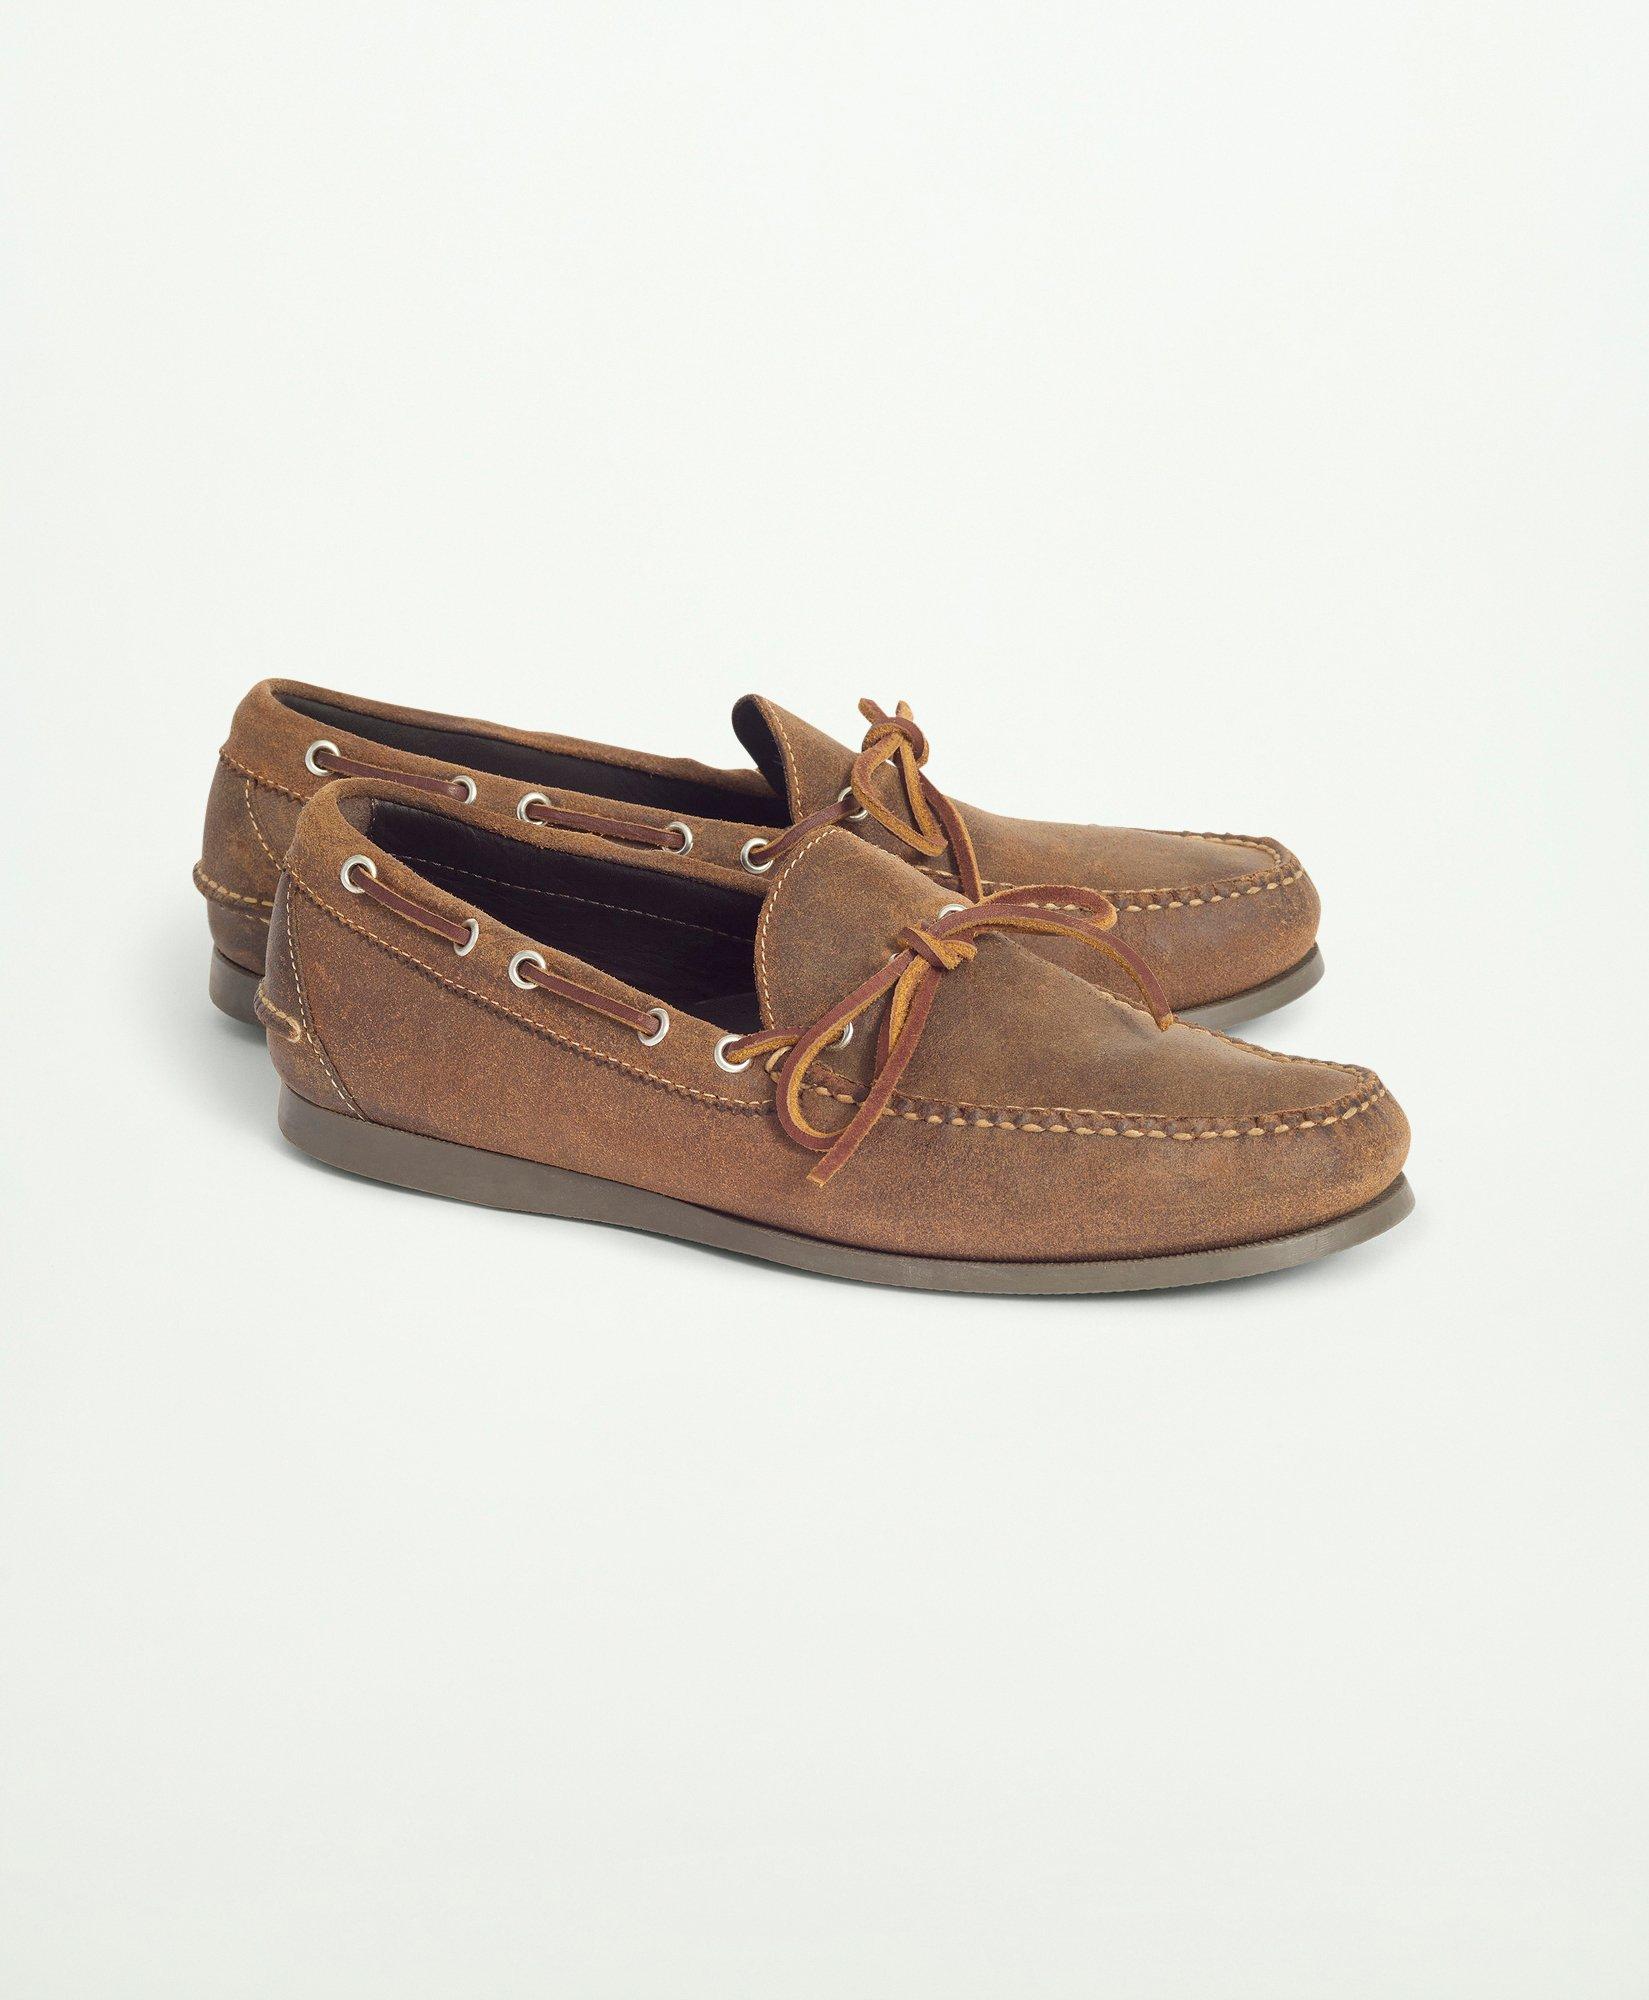 Brooks Brothers Sconset Camp Moc In Leather Shoes | Dark Brown | Size 10 D